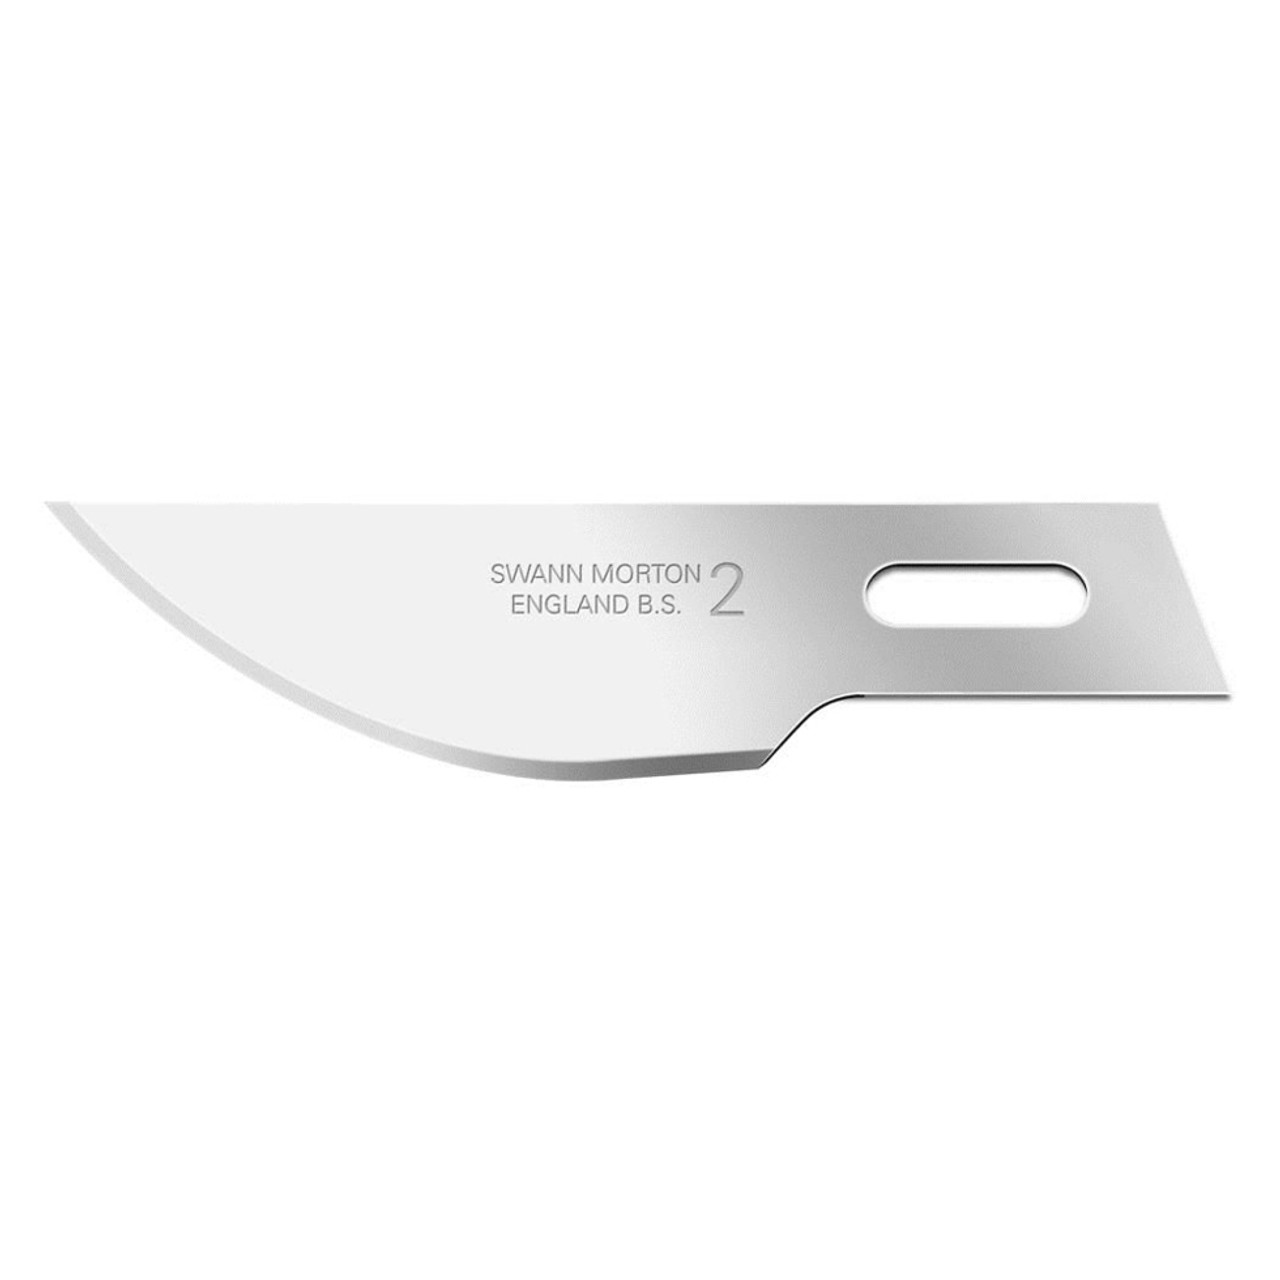 Swann-Morton 1242 craft tool blade number 2 (individually wrapped blade)